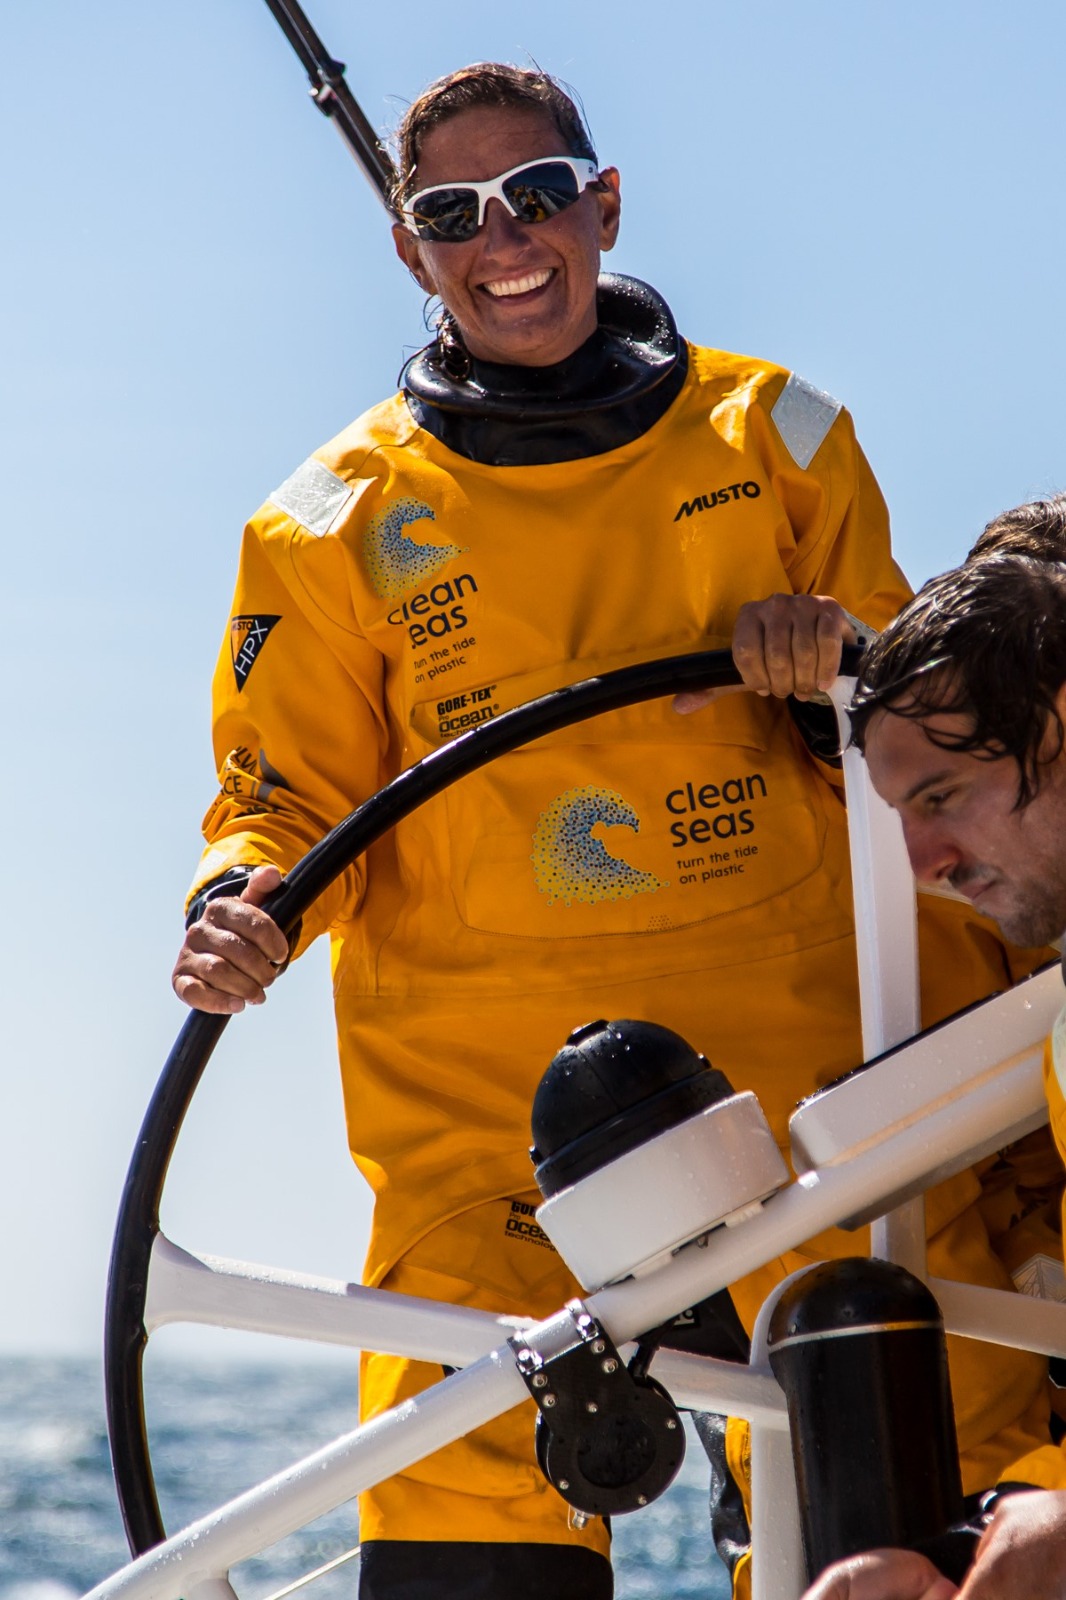 Gender equality in sailing The Ocean Race aims for 5050 split